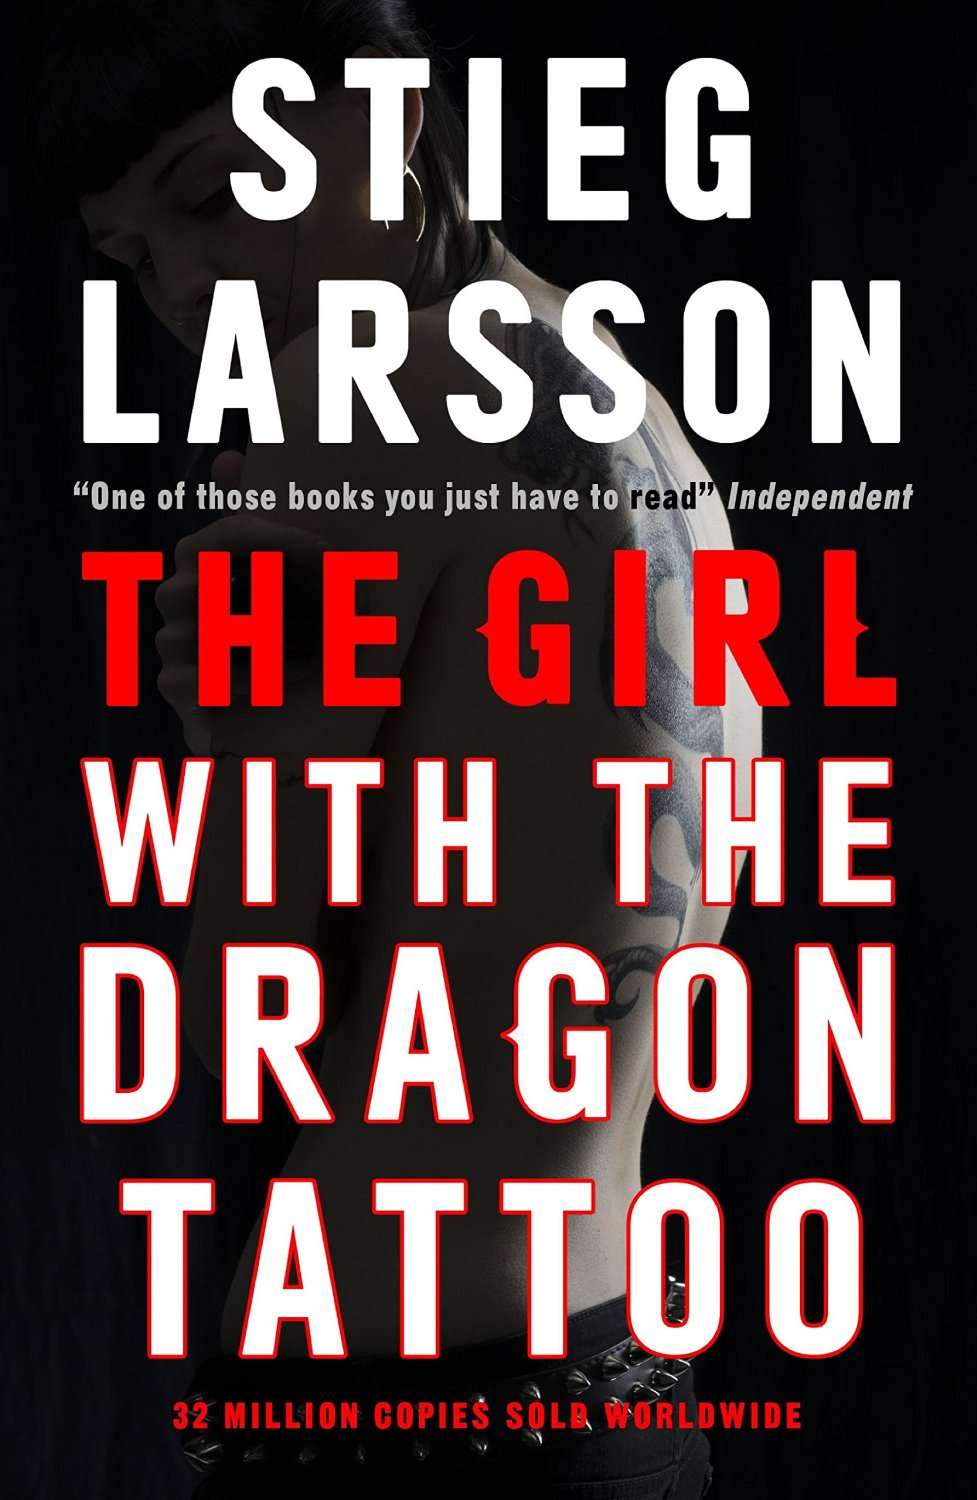 The Girl With the Dragon Tattoo (Millennium Series Book 1) by Stieg Larsson